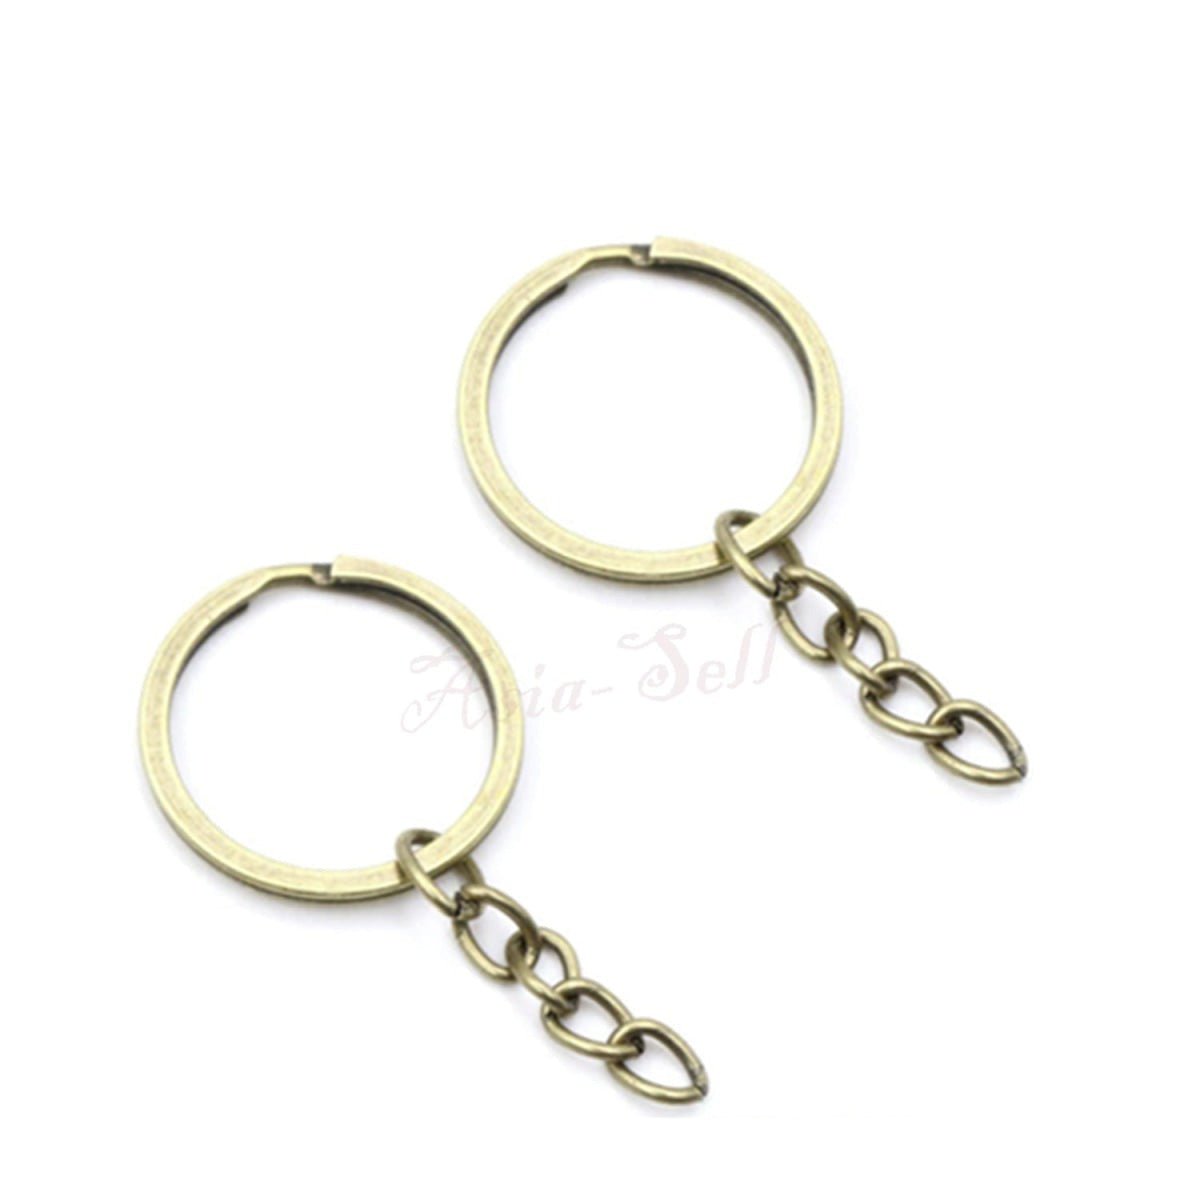 20pcs 28mm Rose Gold Ancient Keyring Keychain Split Ring Chain Key Rings Key Chains - Bronze - - Asia Sell